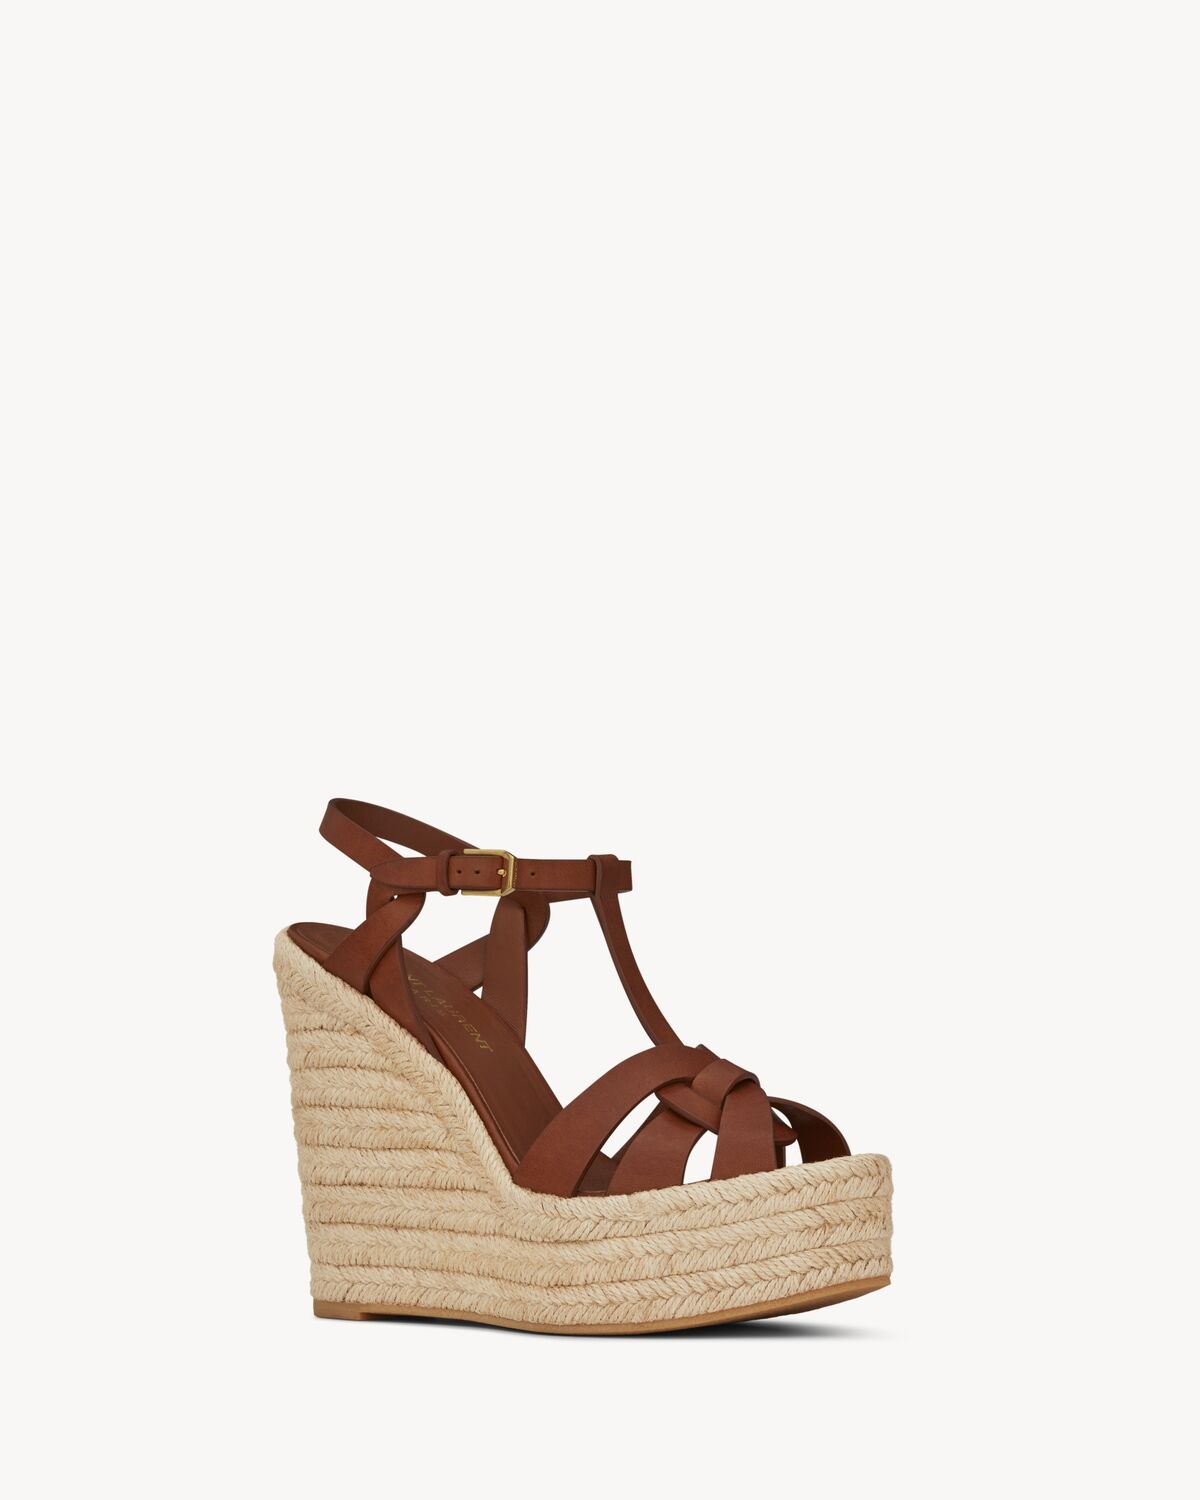 TRIBUTE espadrilles wedge in smooth leather